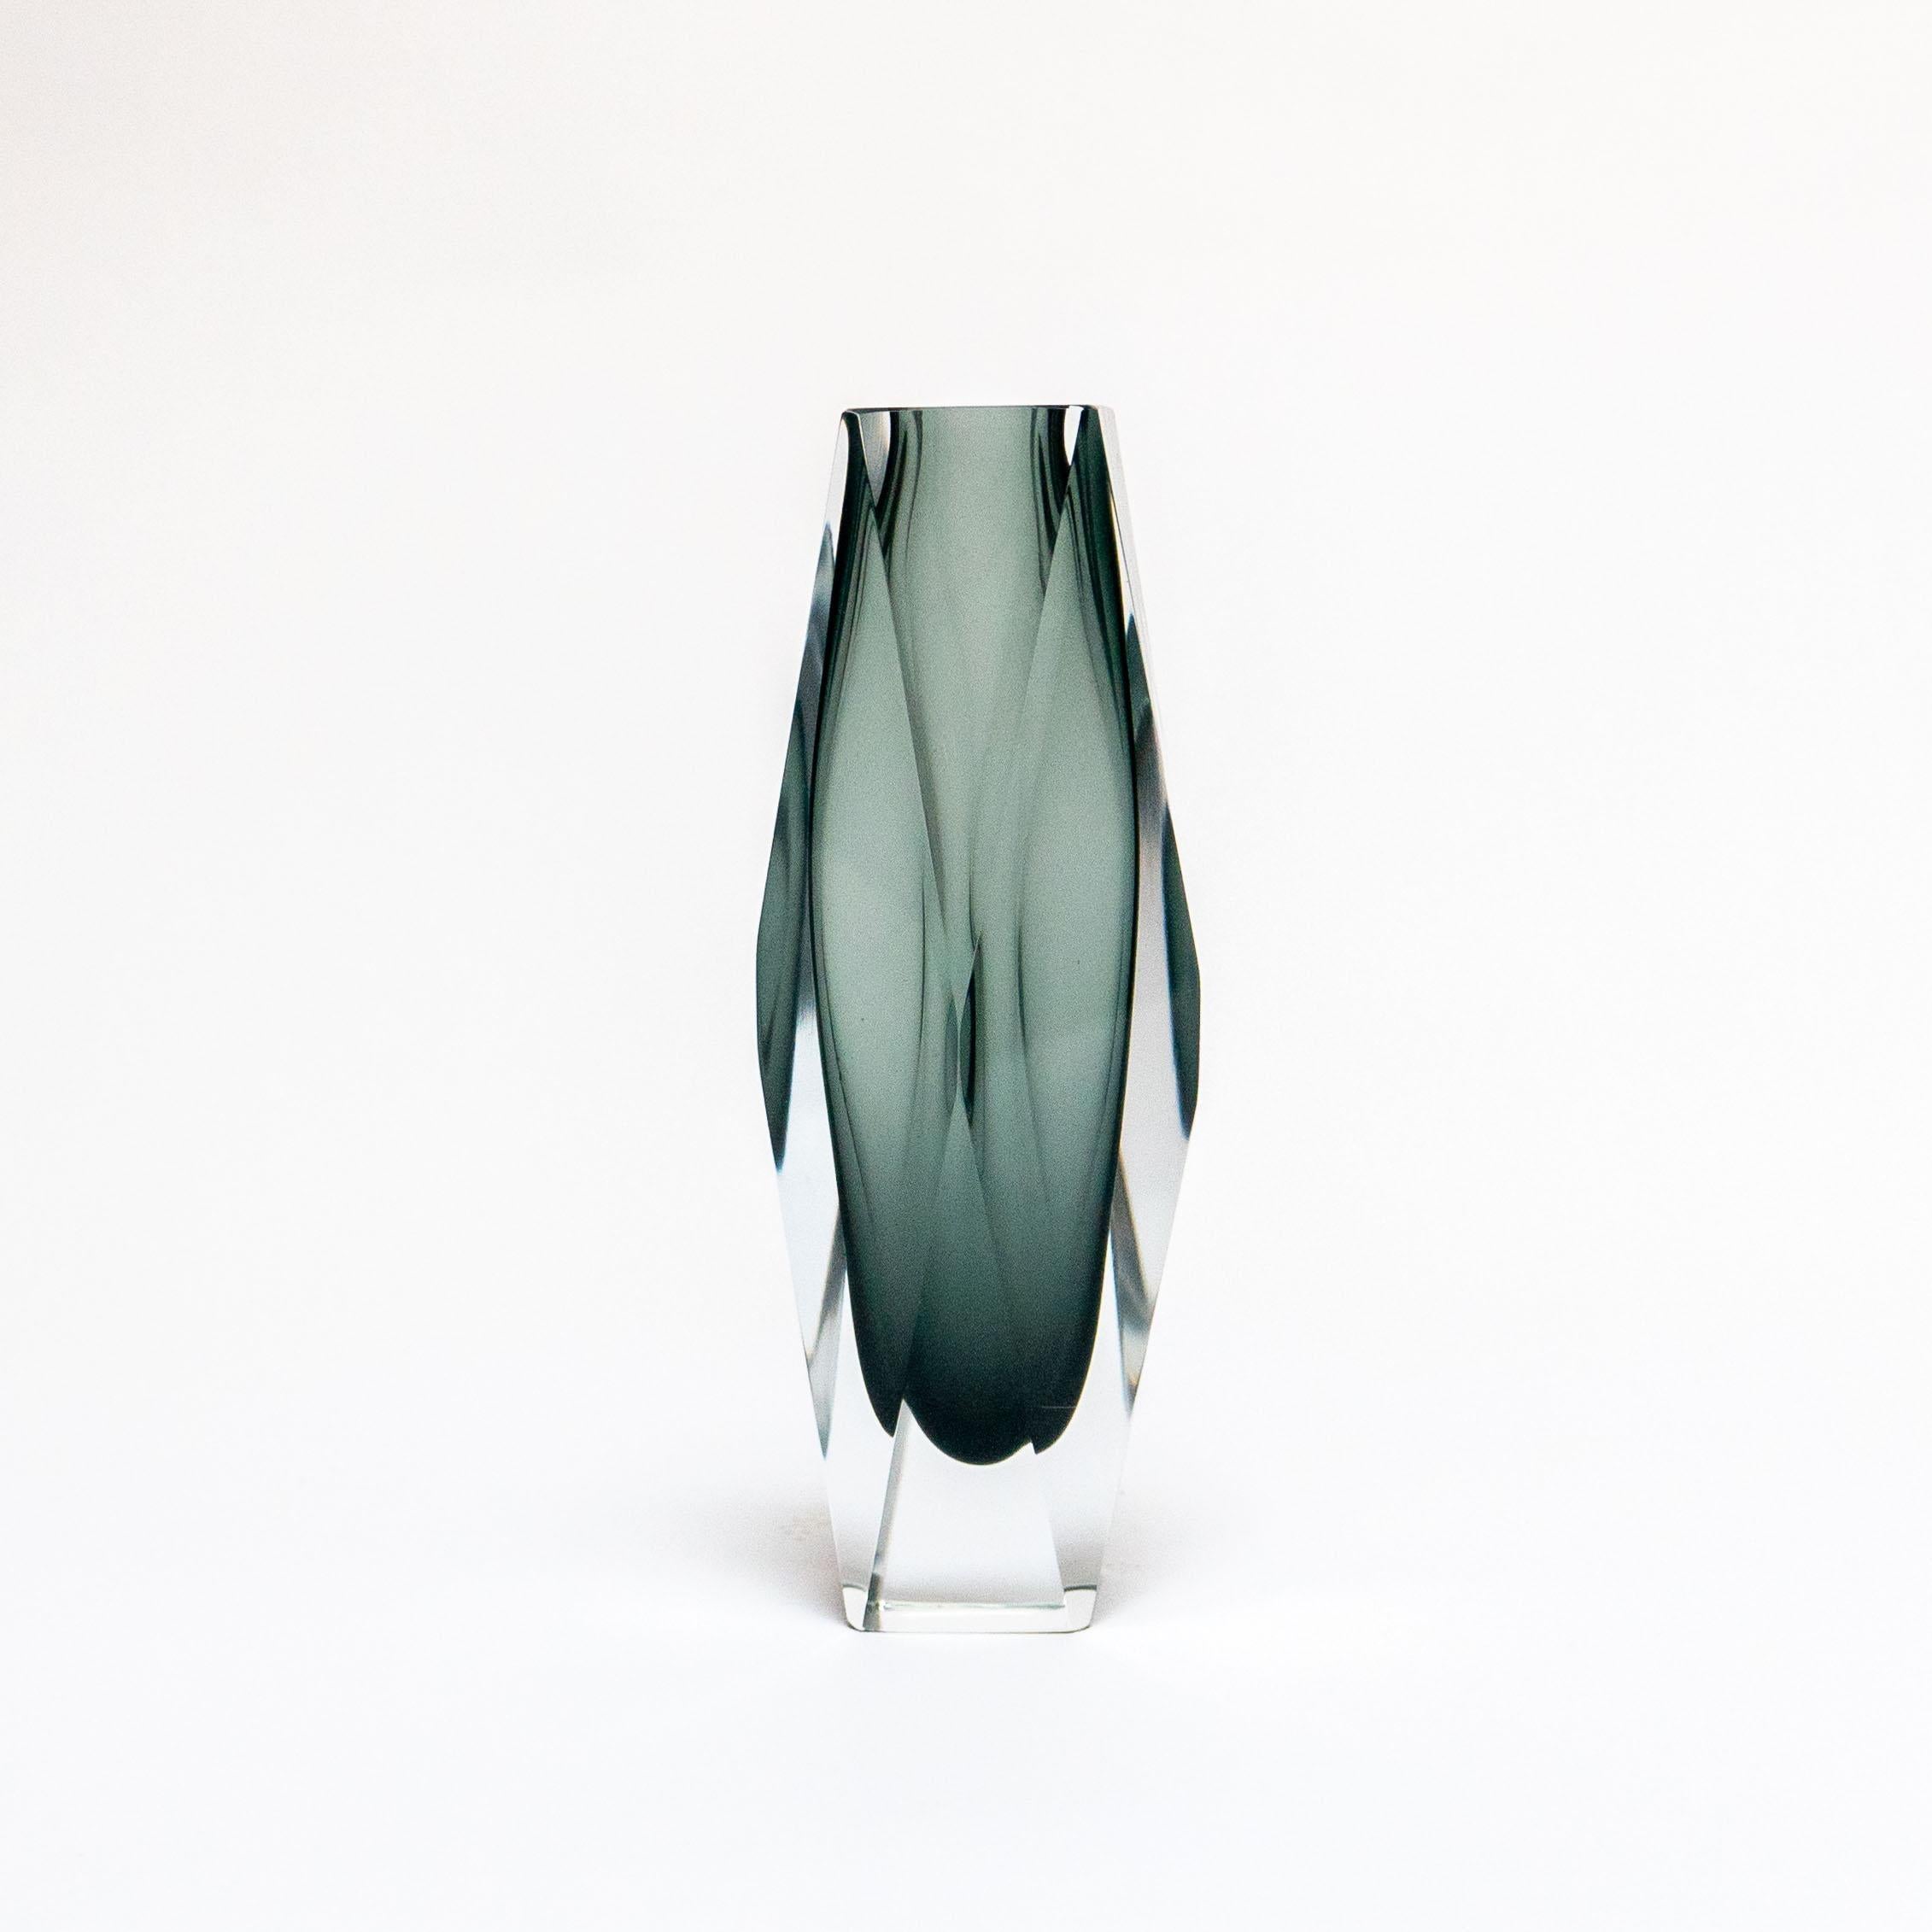 Universally regarded as one of the most prolific and capable designers of Murano glass vases and objects at large, Flavio Poli teamed up with some of the most influential and skilled glass producers of Murano to create timeless design pieces.